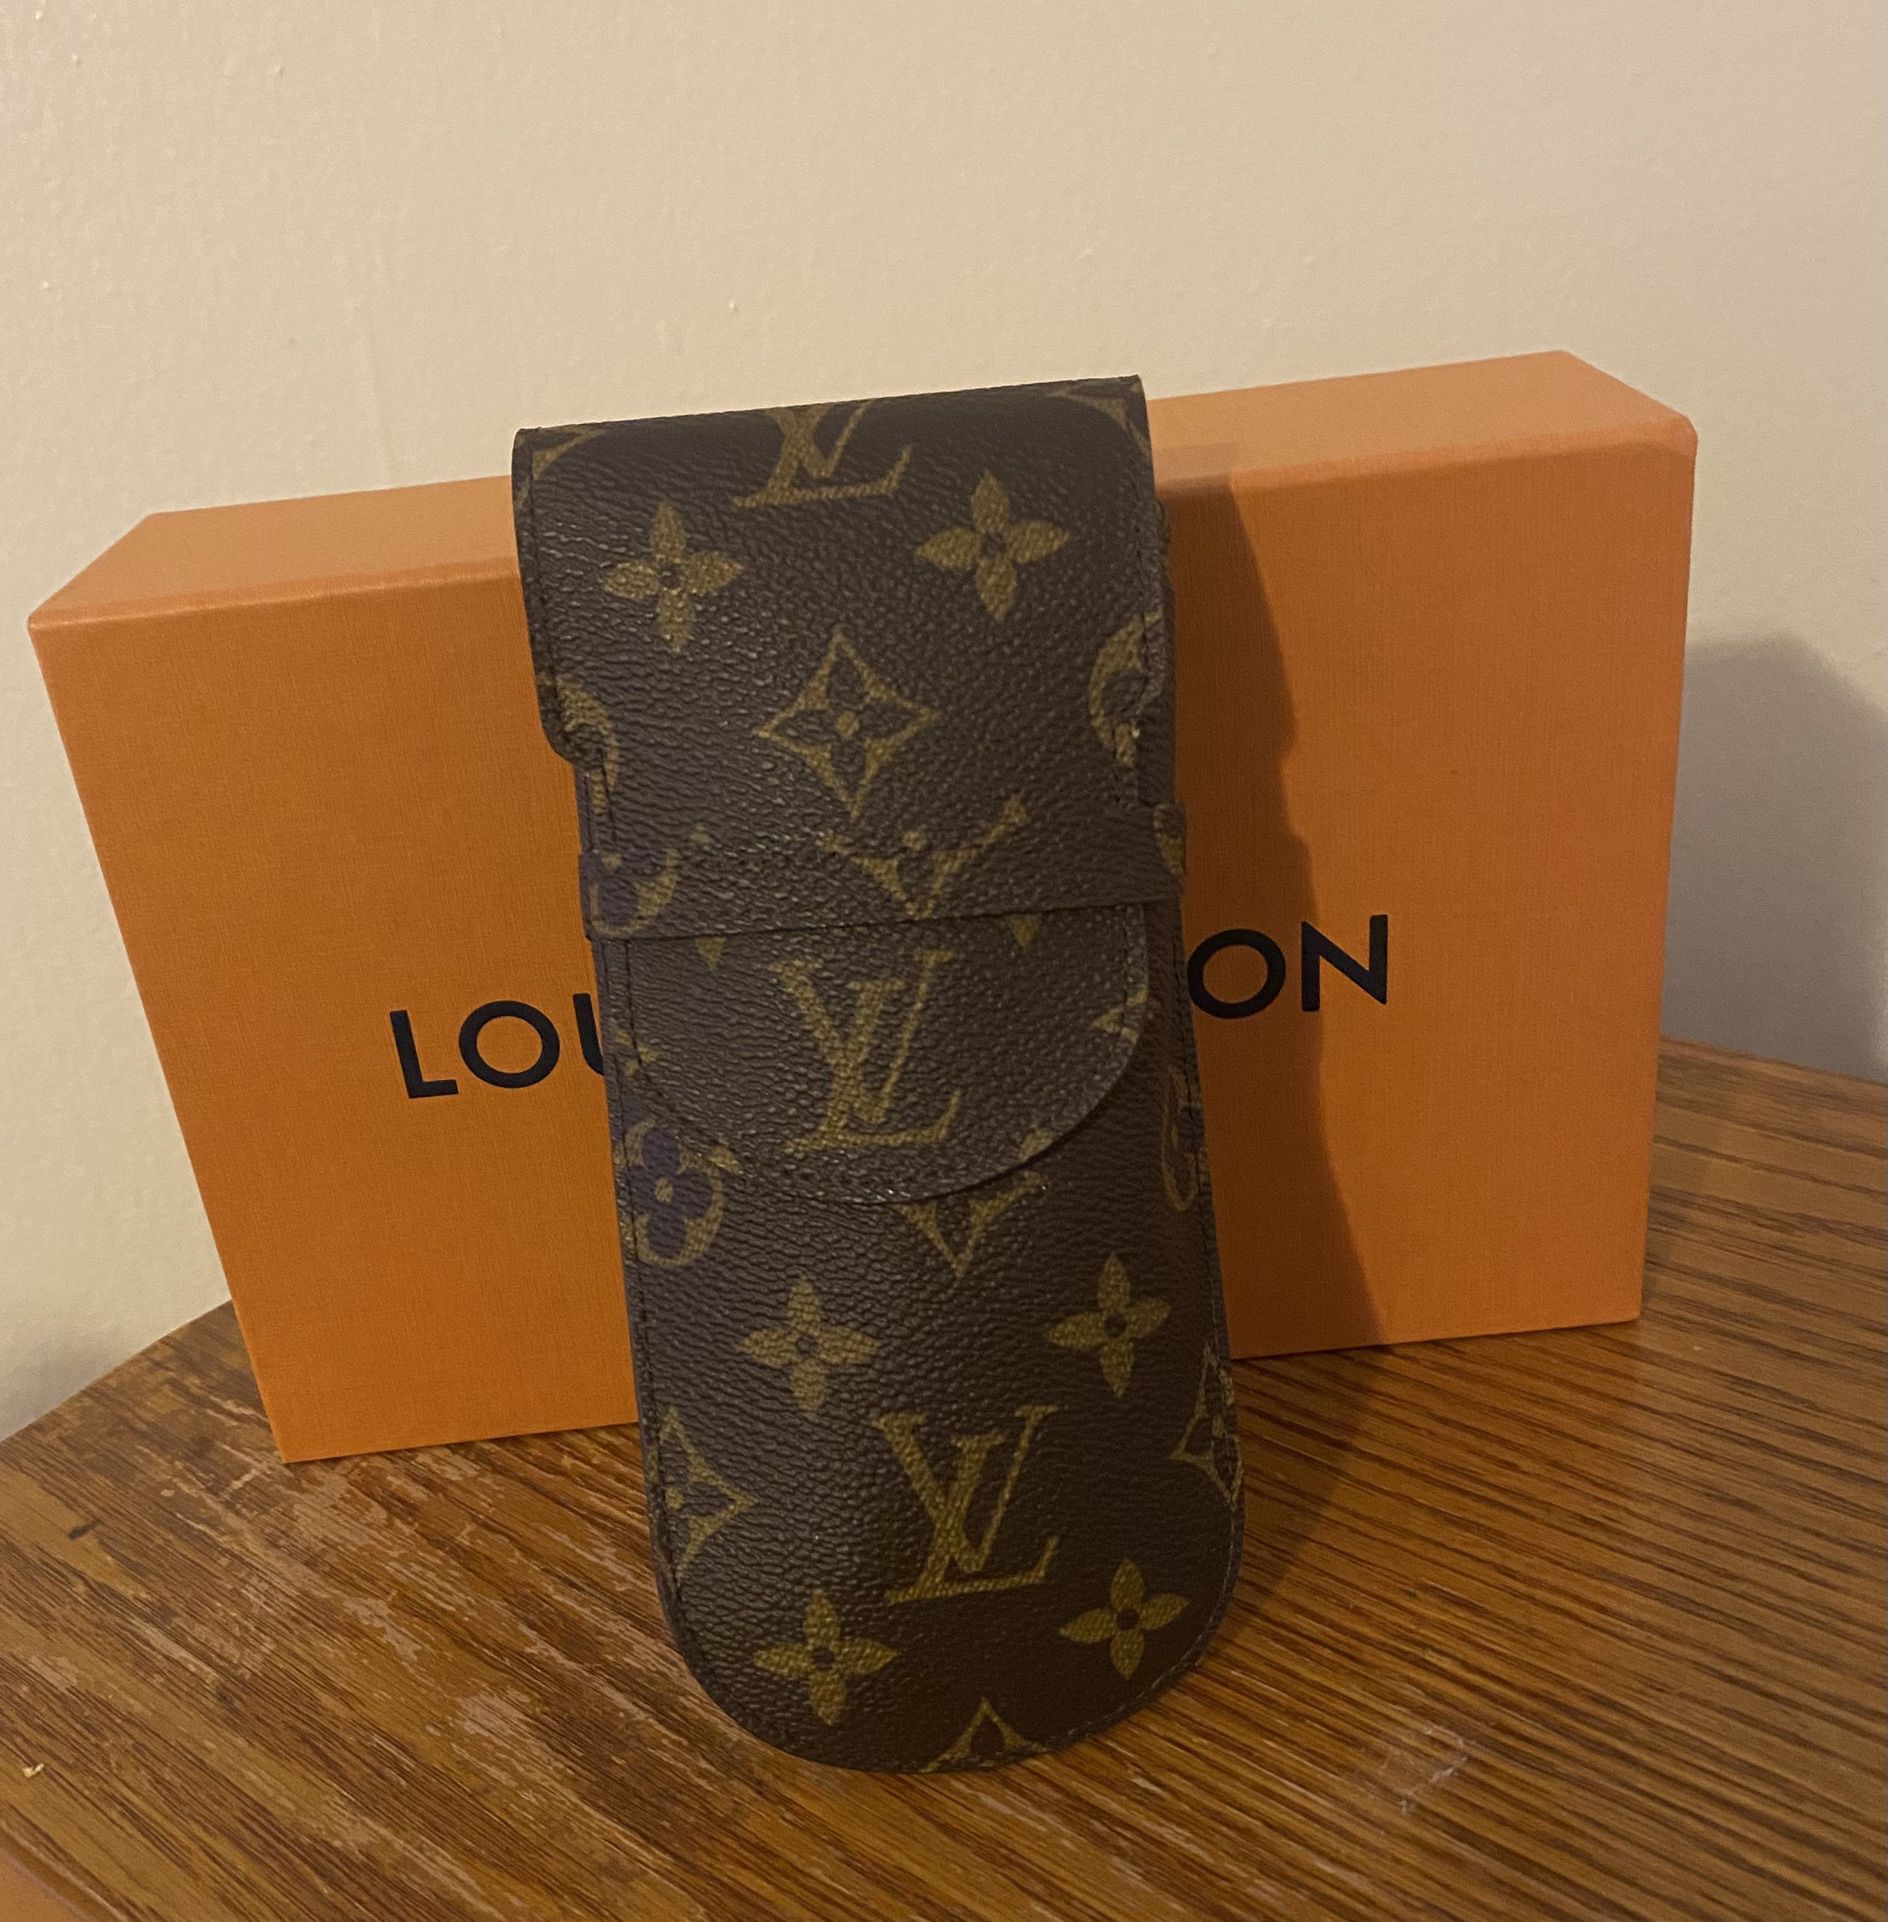 Authentic Vintage Louis Vuitton Sunglasses Case for Sale in Baldwin, NY -  OfferUp